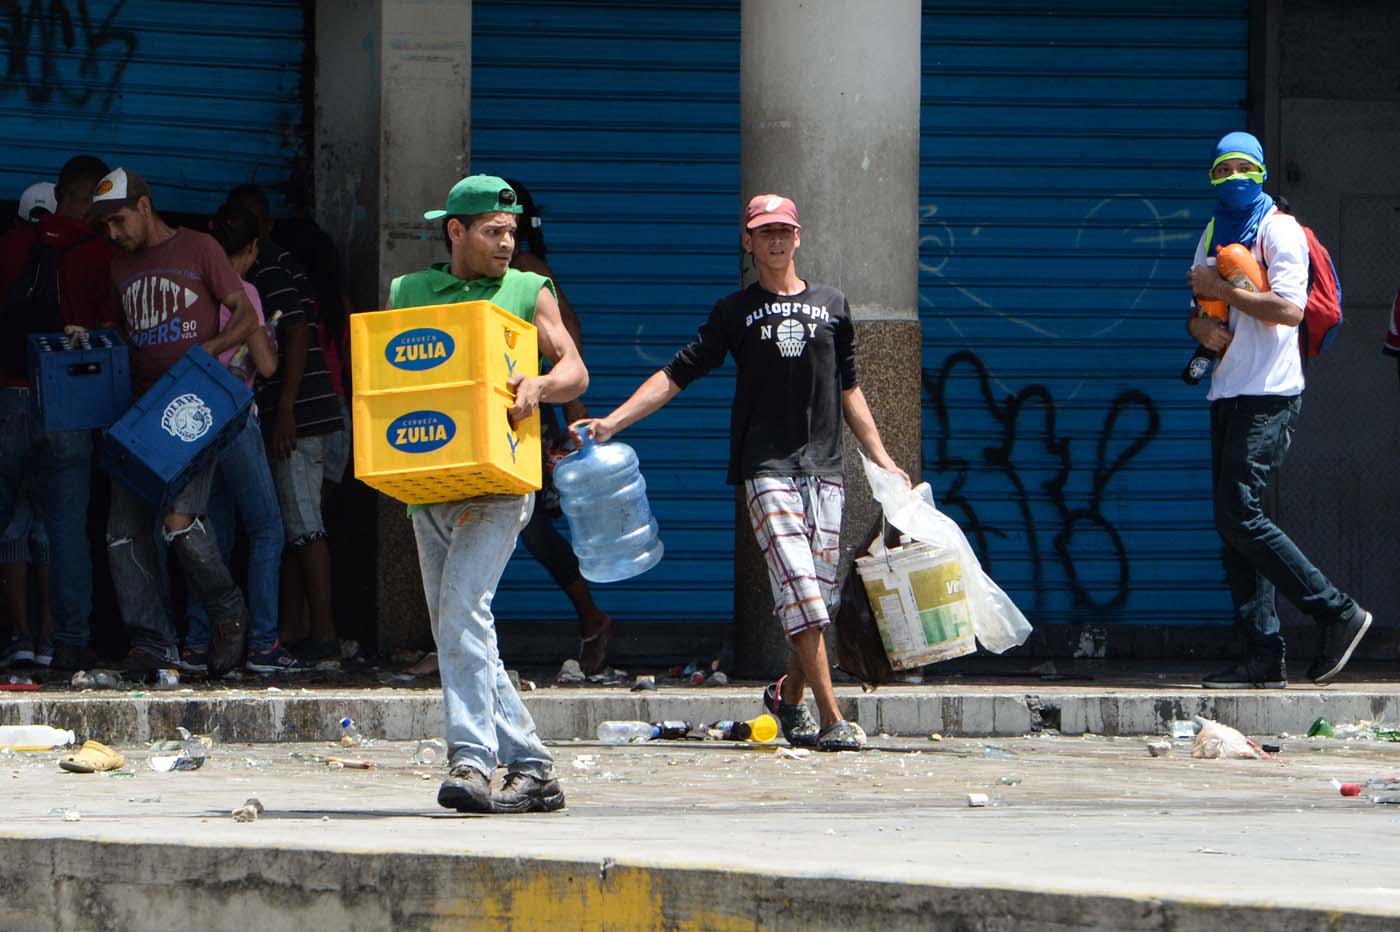 People carry stolen merchandise during lootings in Maracay, Aragua State, Venezuela on June 27, 2017. A political and economic crisis in the oil-producing country has spawned often violent demonstrations by protesters demanding President Nicolas Maduro's resignation and new elections. The unrest has left 76 people dead since April 1. / AFP PHOTO / Federico PARRA